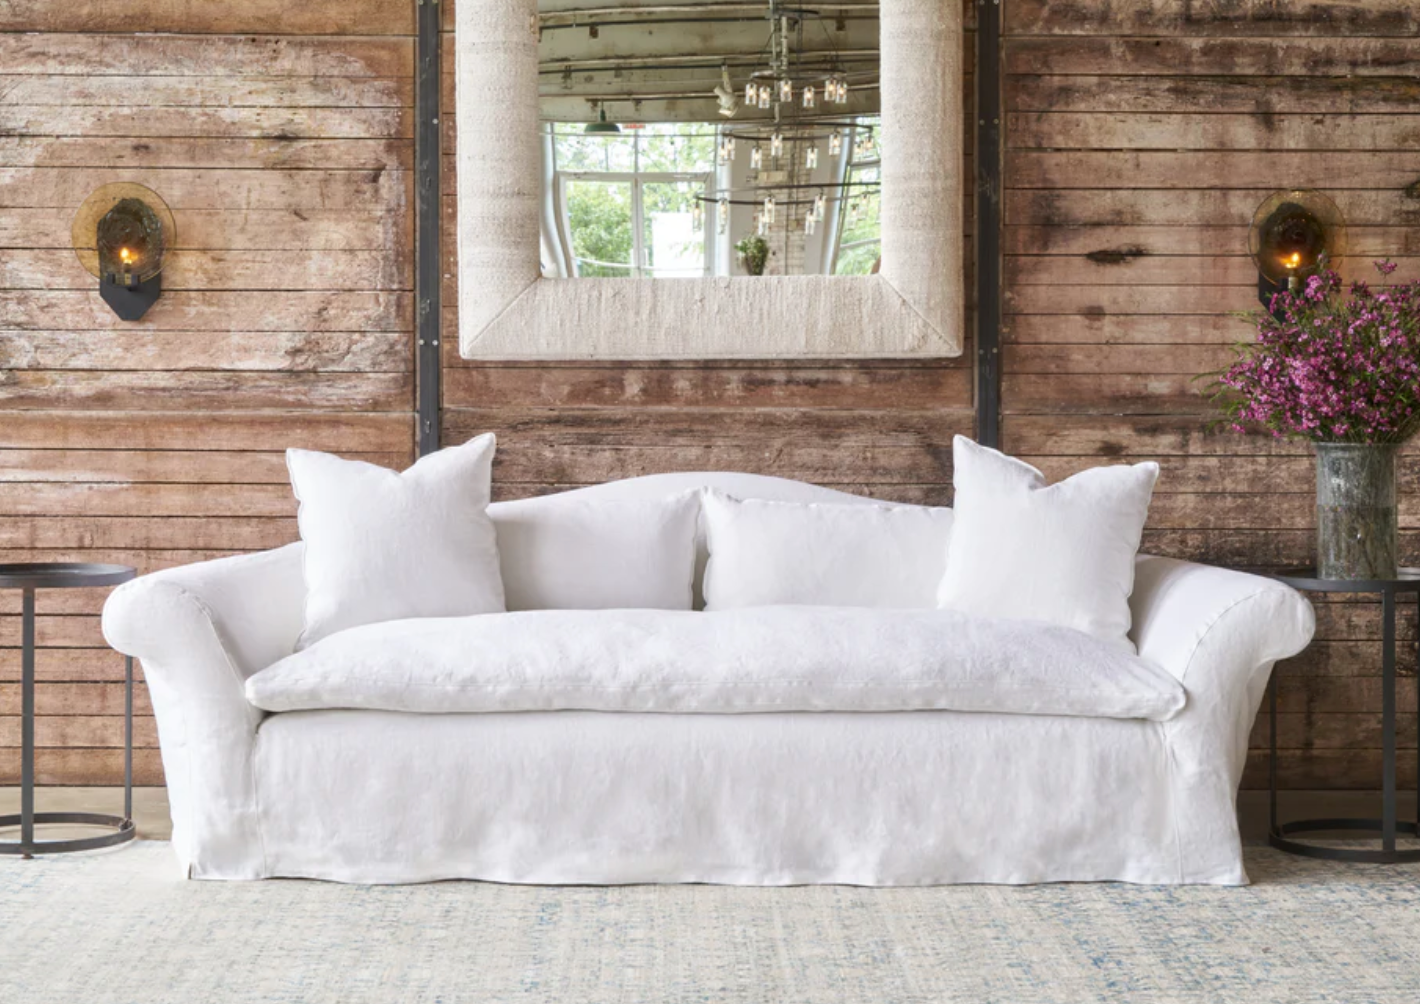 Performance Fabrics for Upholstery - The Ultimate Guide - Laurel Home